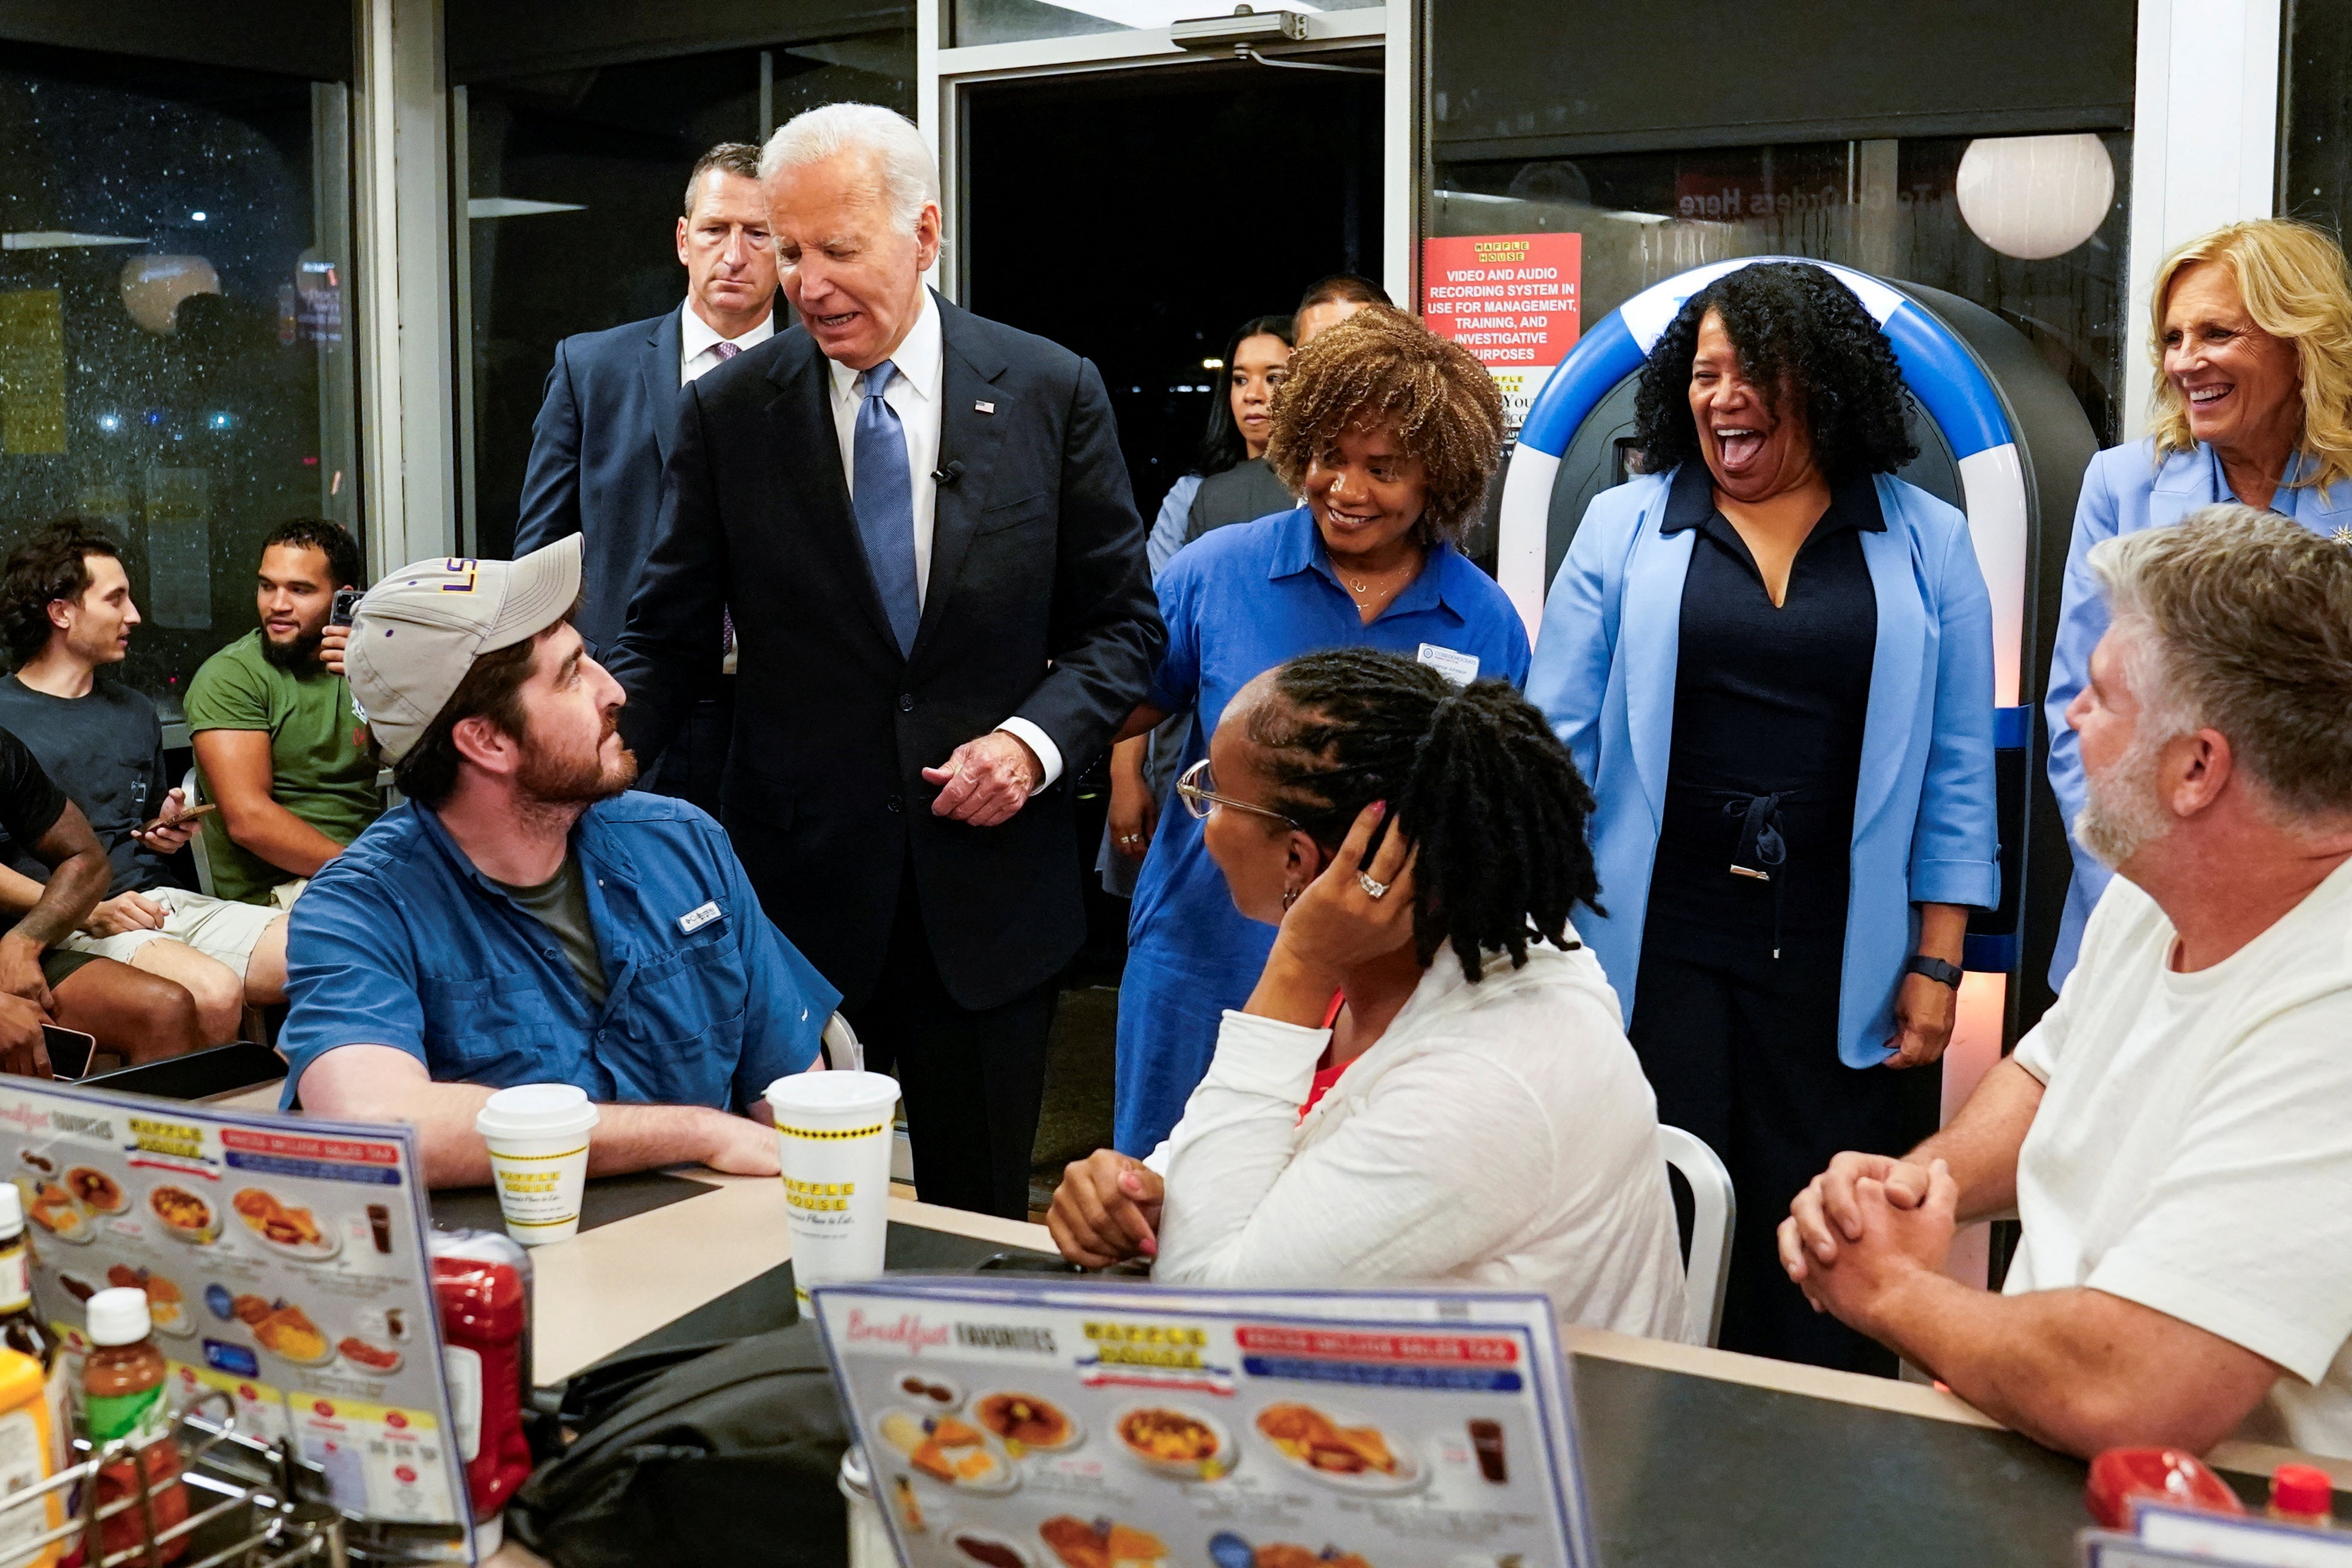 President Joe Biden greets people as he and First Lady Jill Biden pick up an order from a Waffle House in Marietta, Georgia